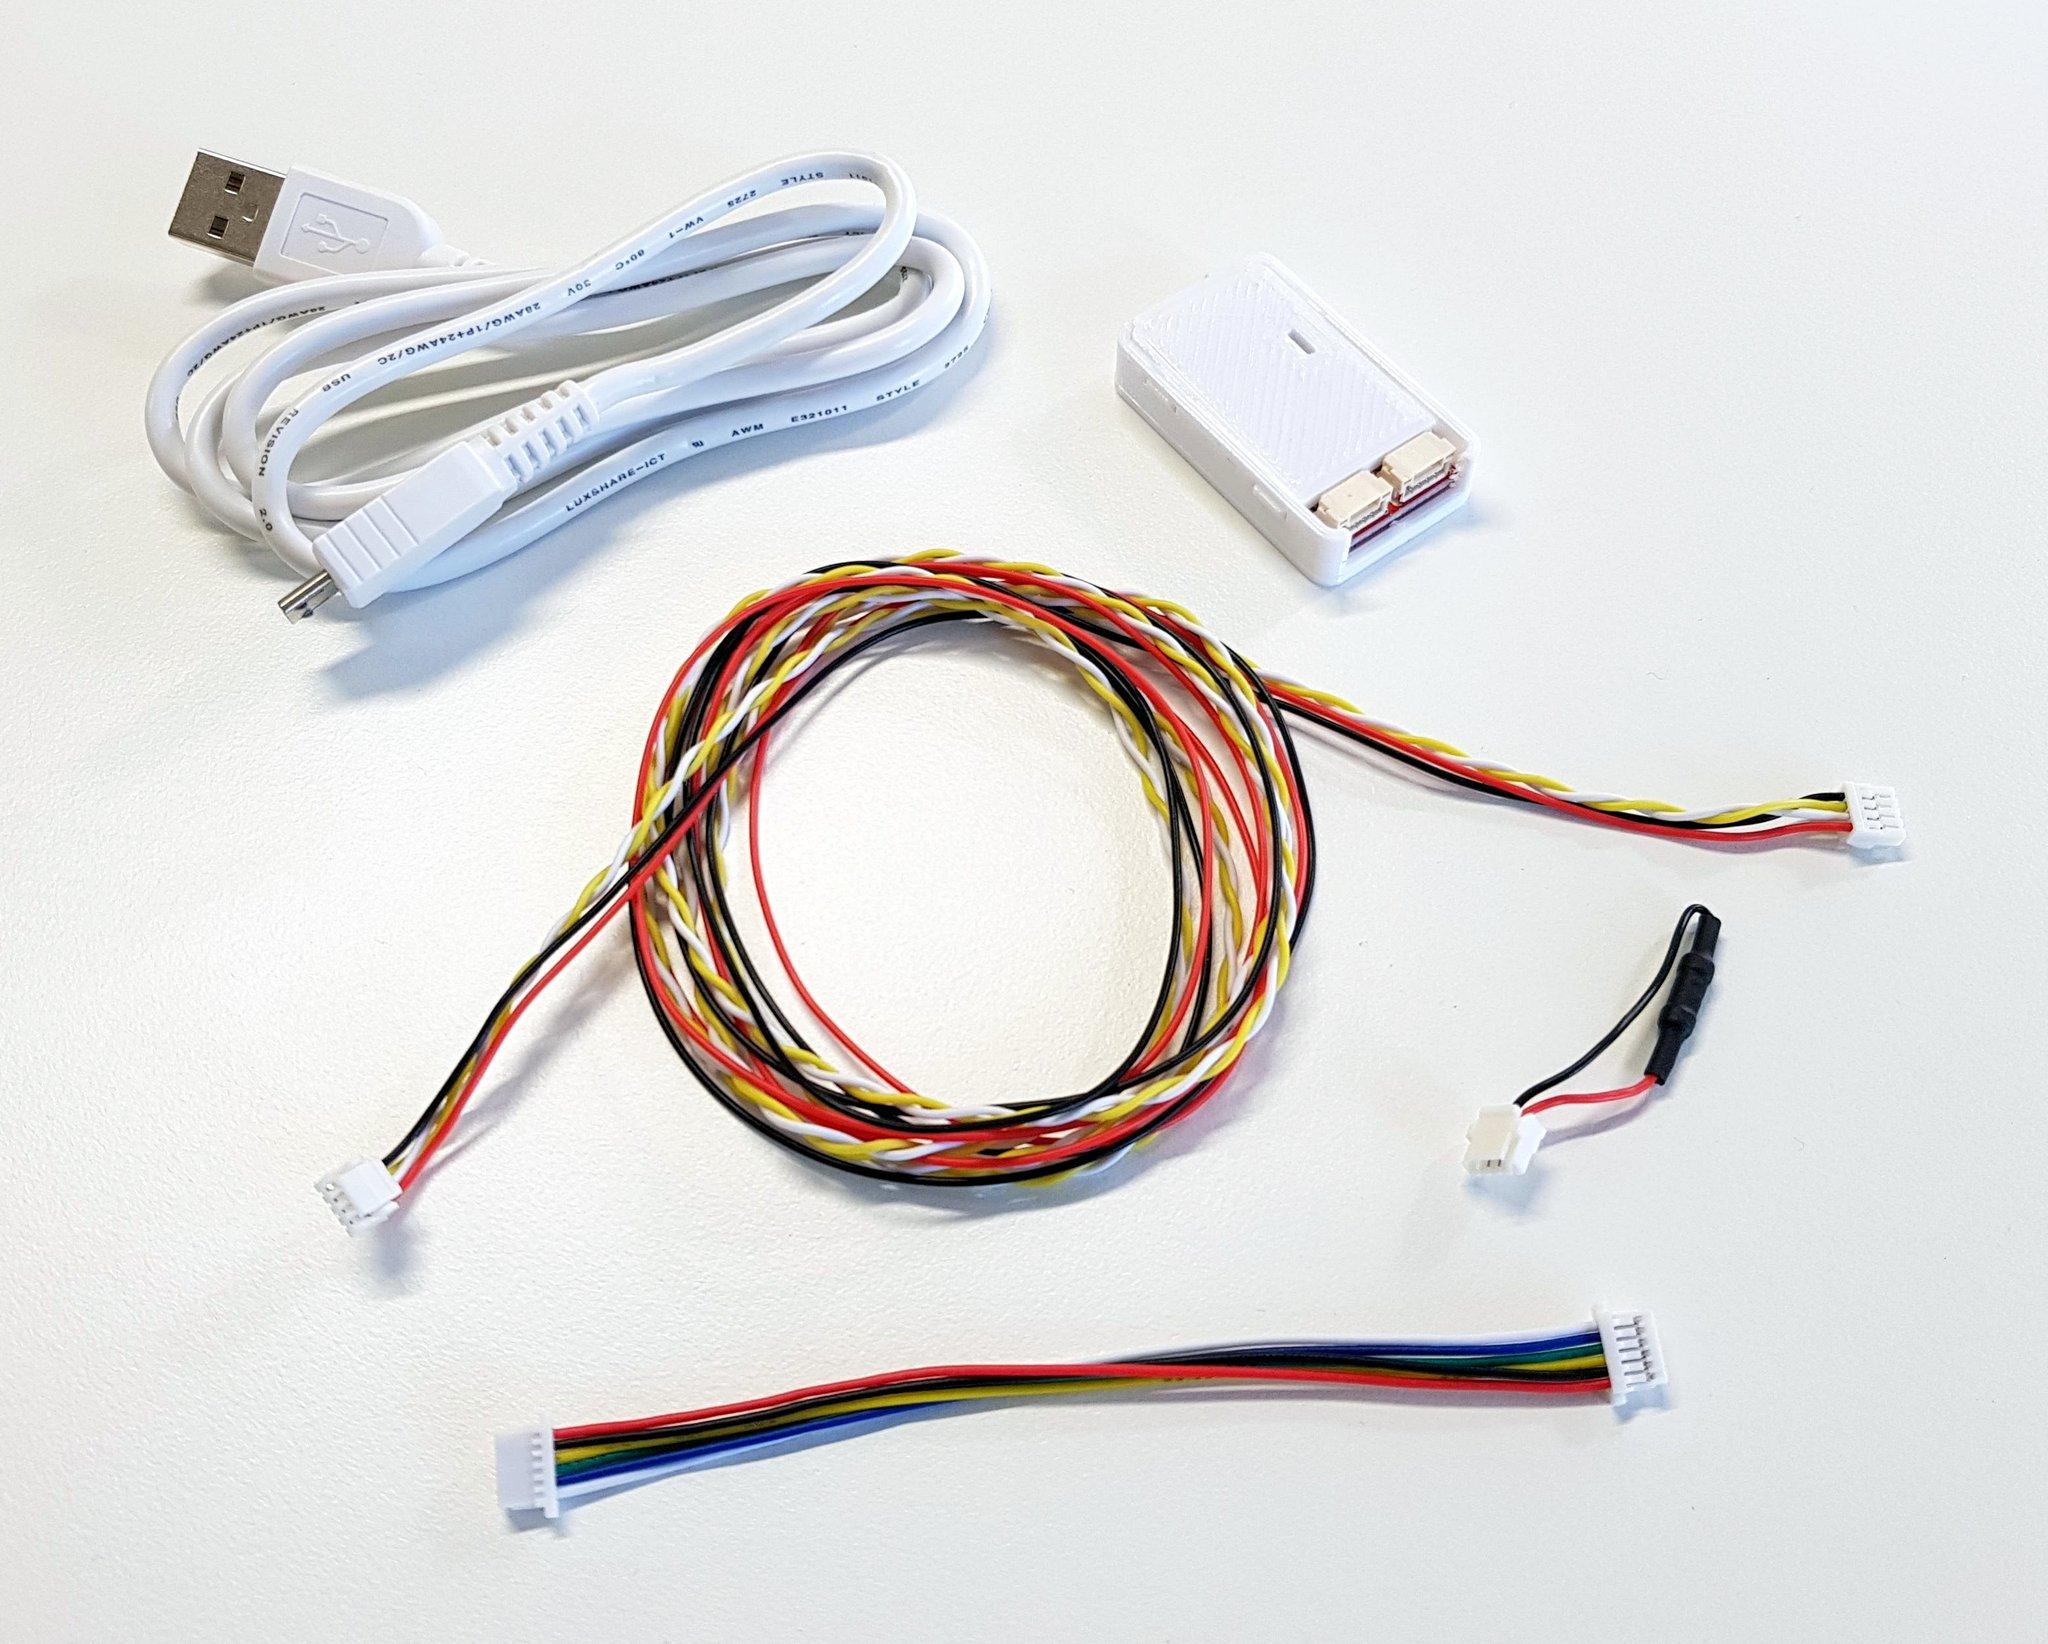 Babel cable kit